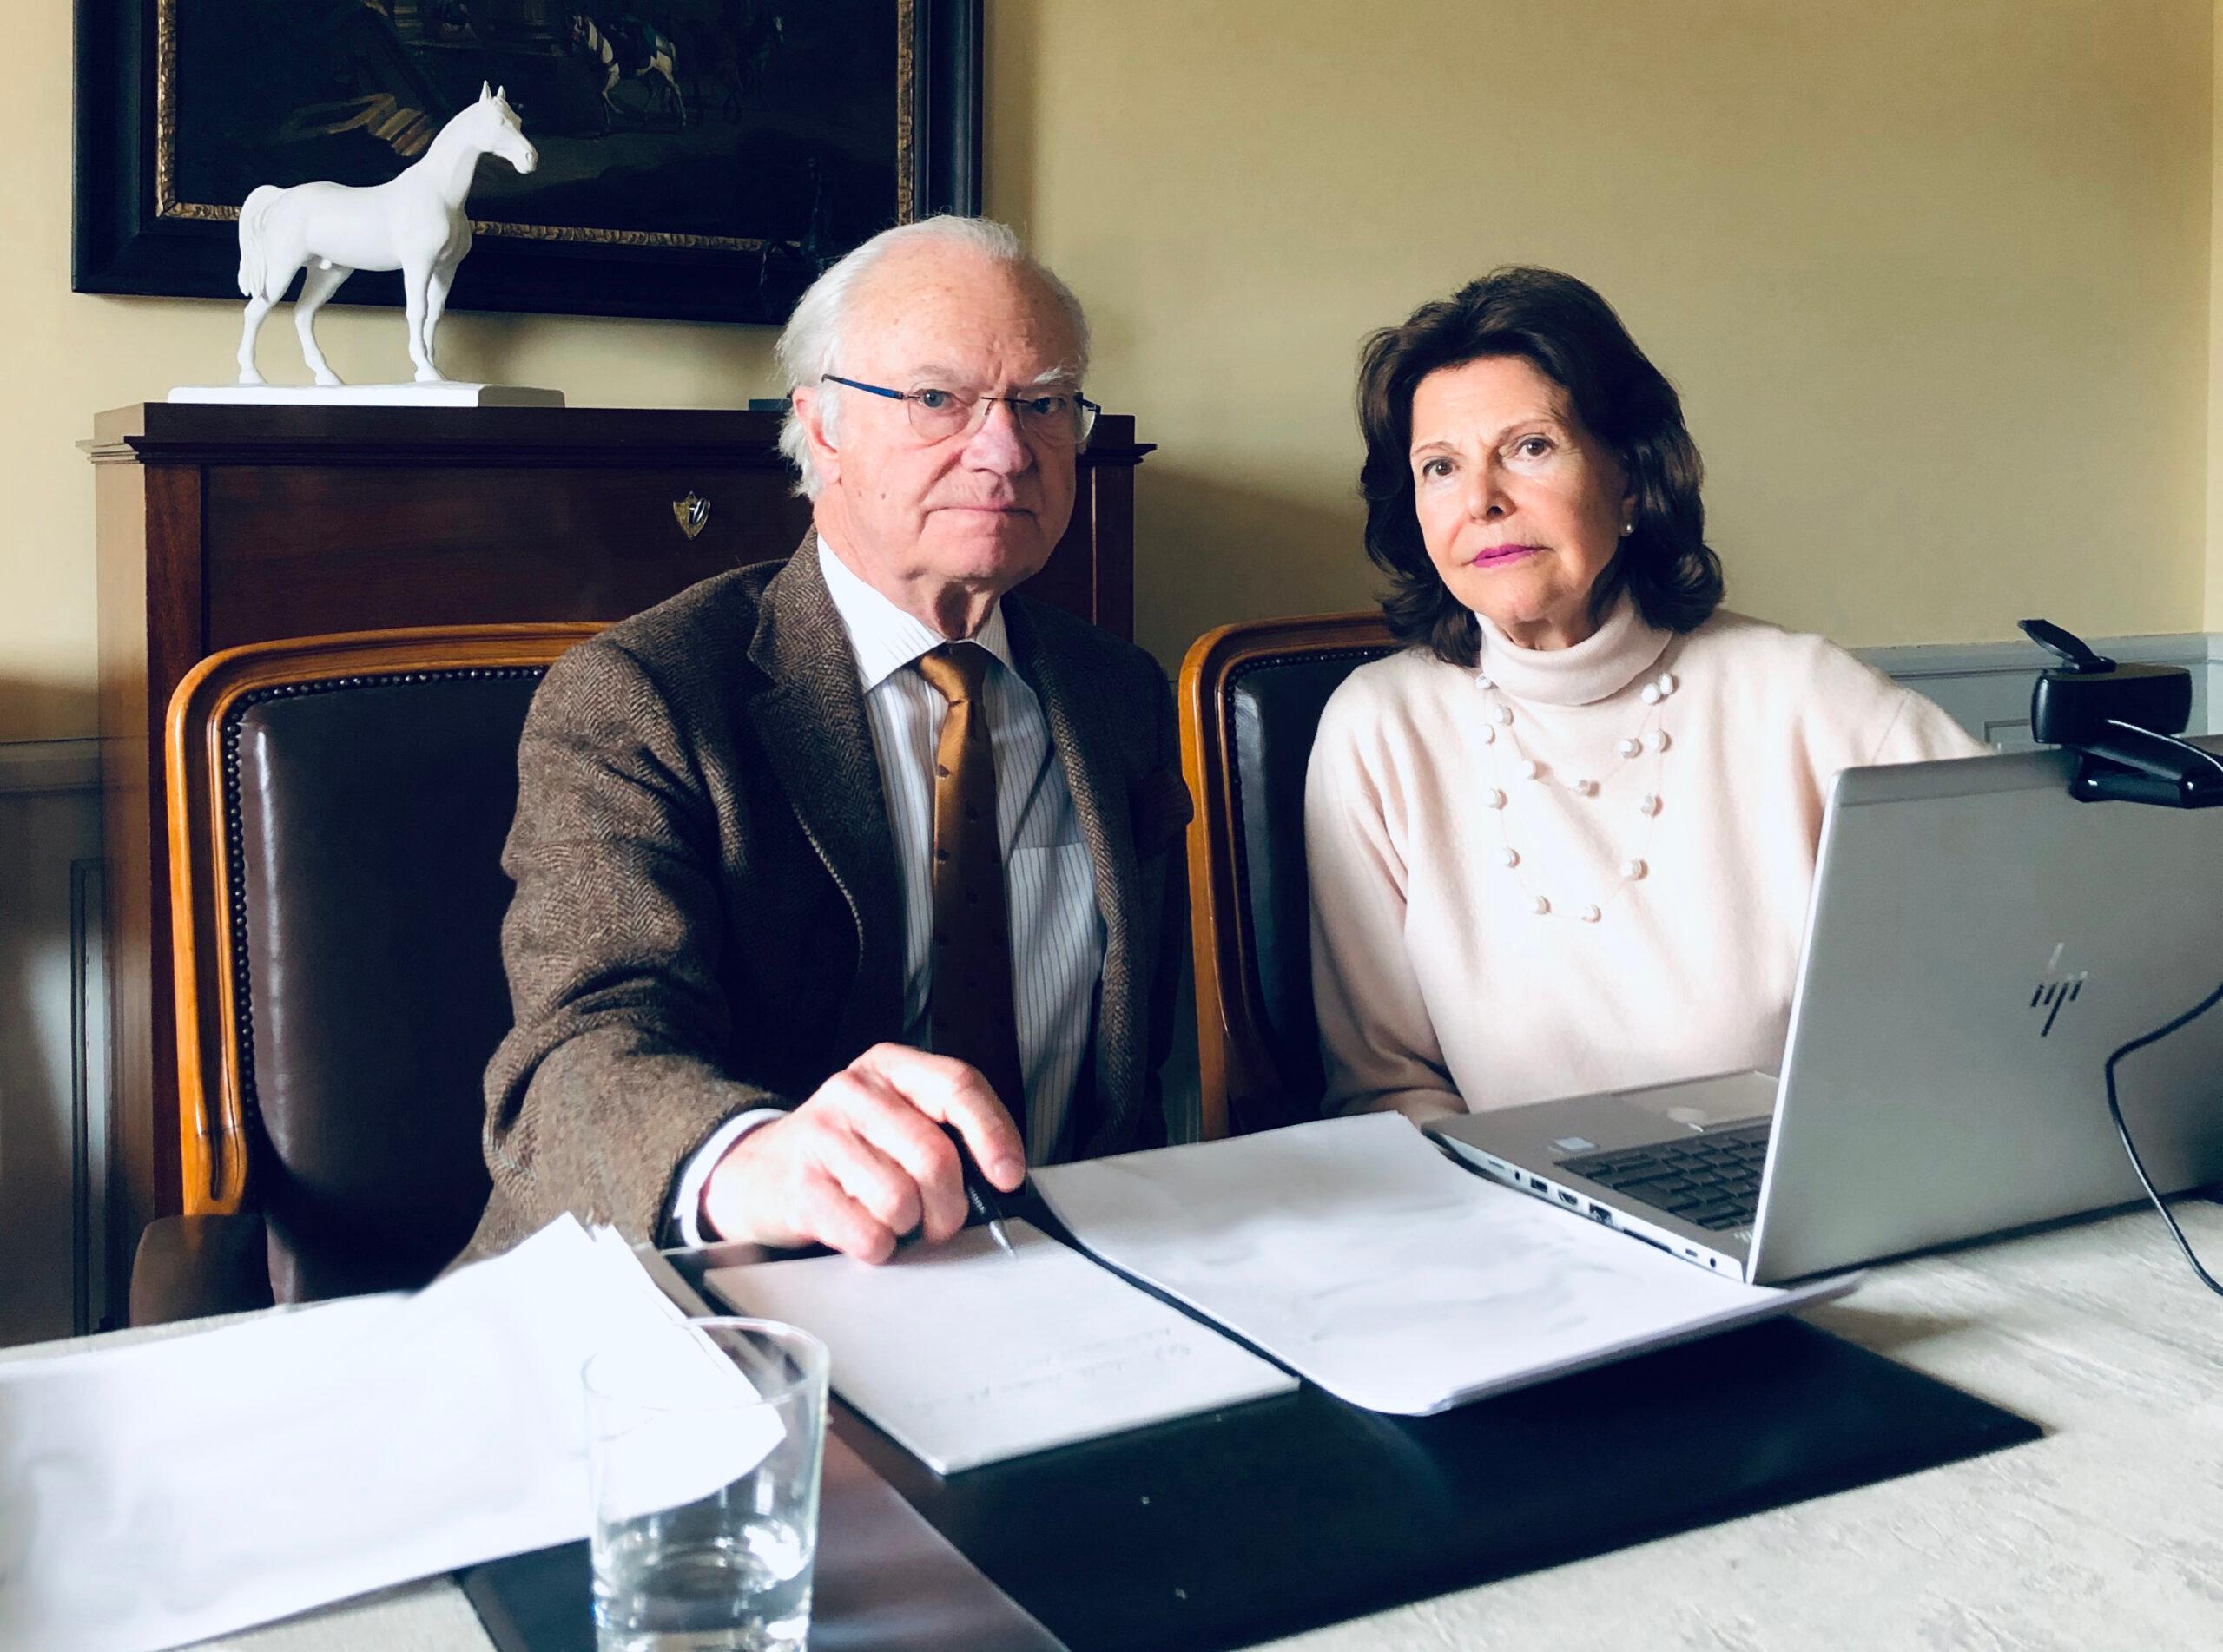 King Carl XVI Gustaf and Queen Silvia at a desk with a computer with a camera.